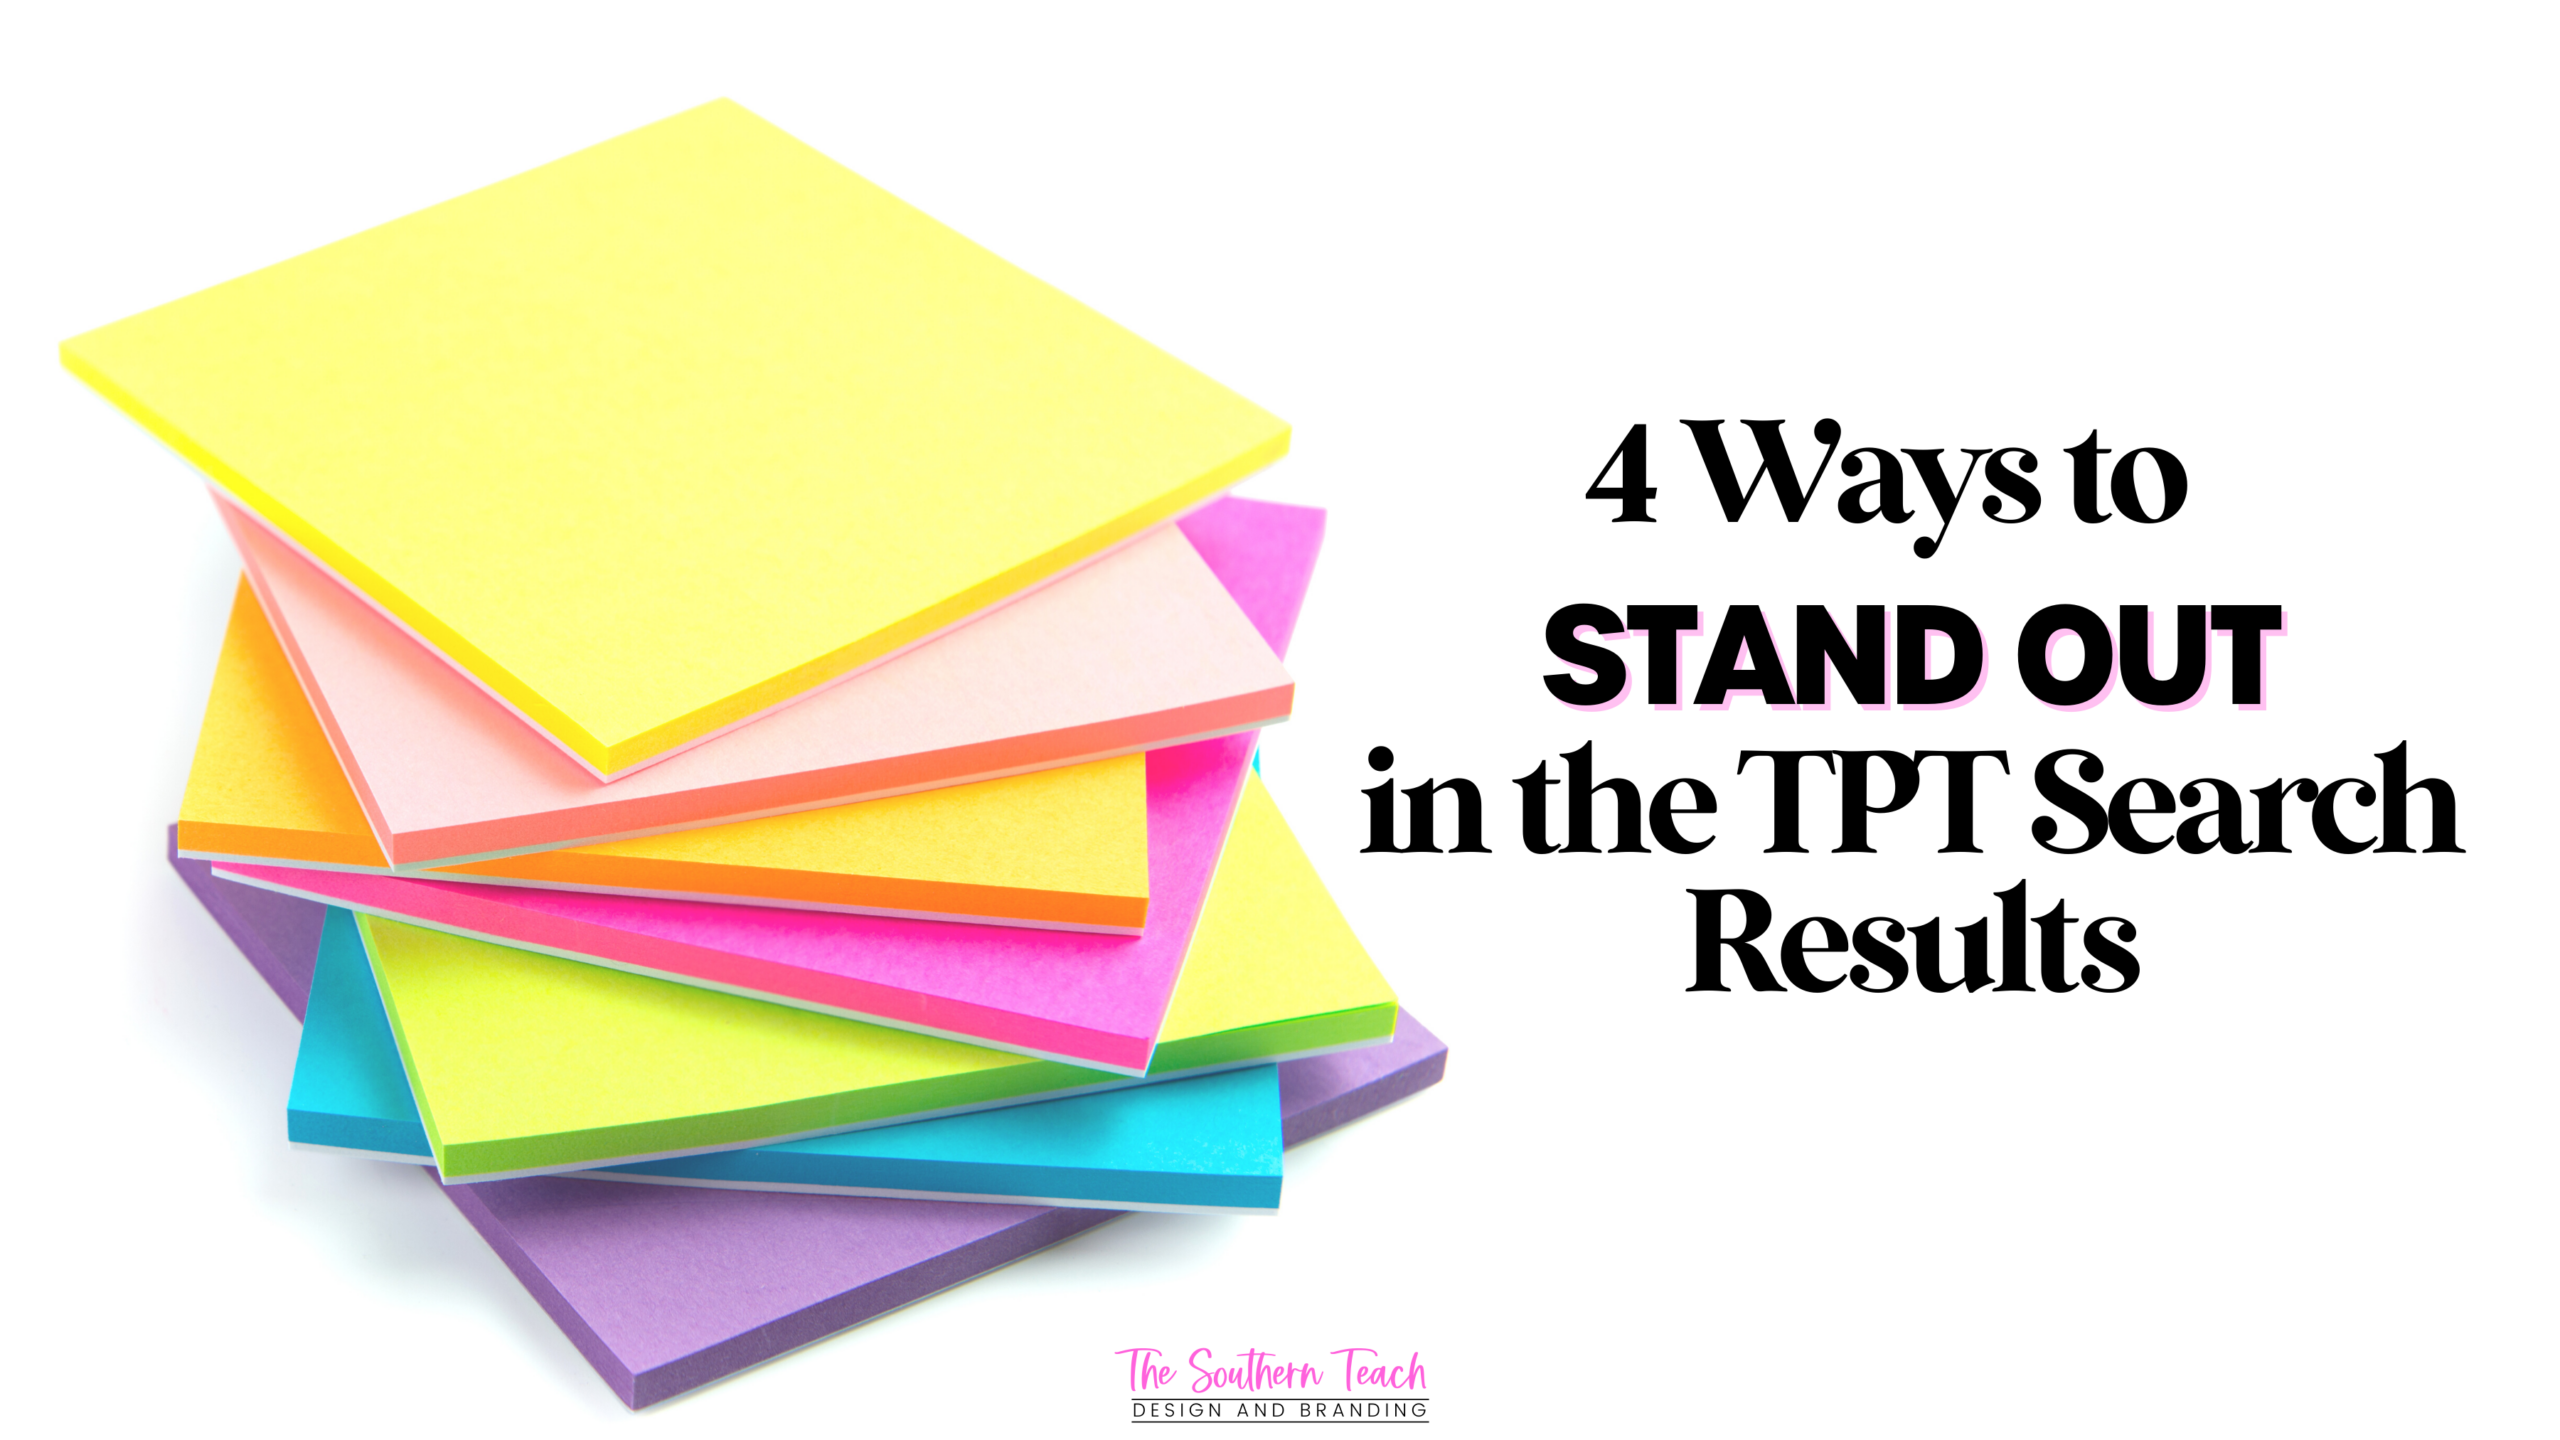 4 Ways to Stand Out in the TPT Search Results